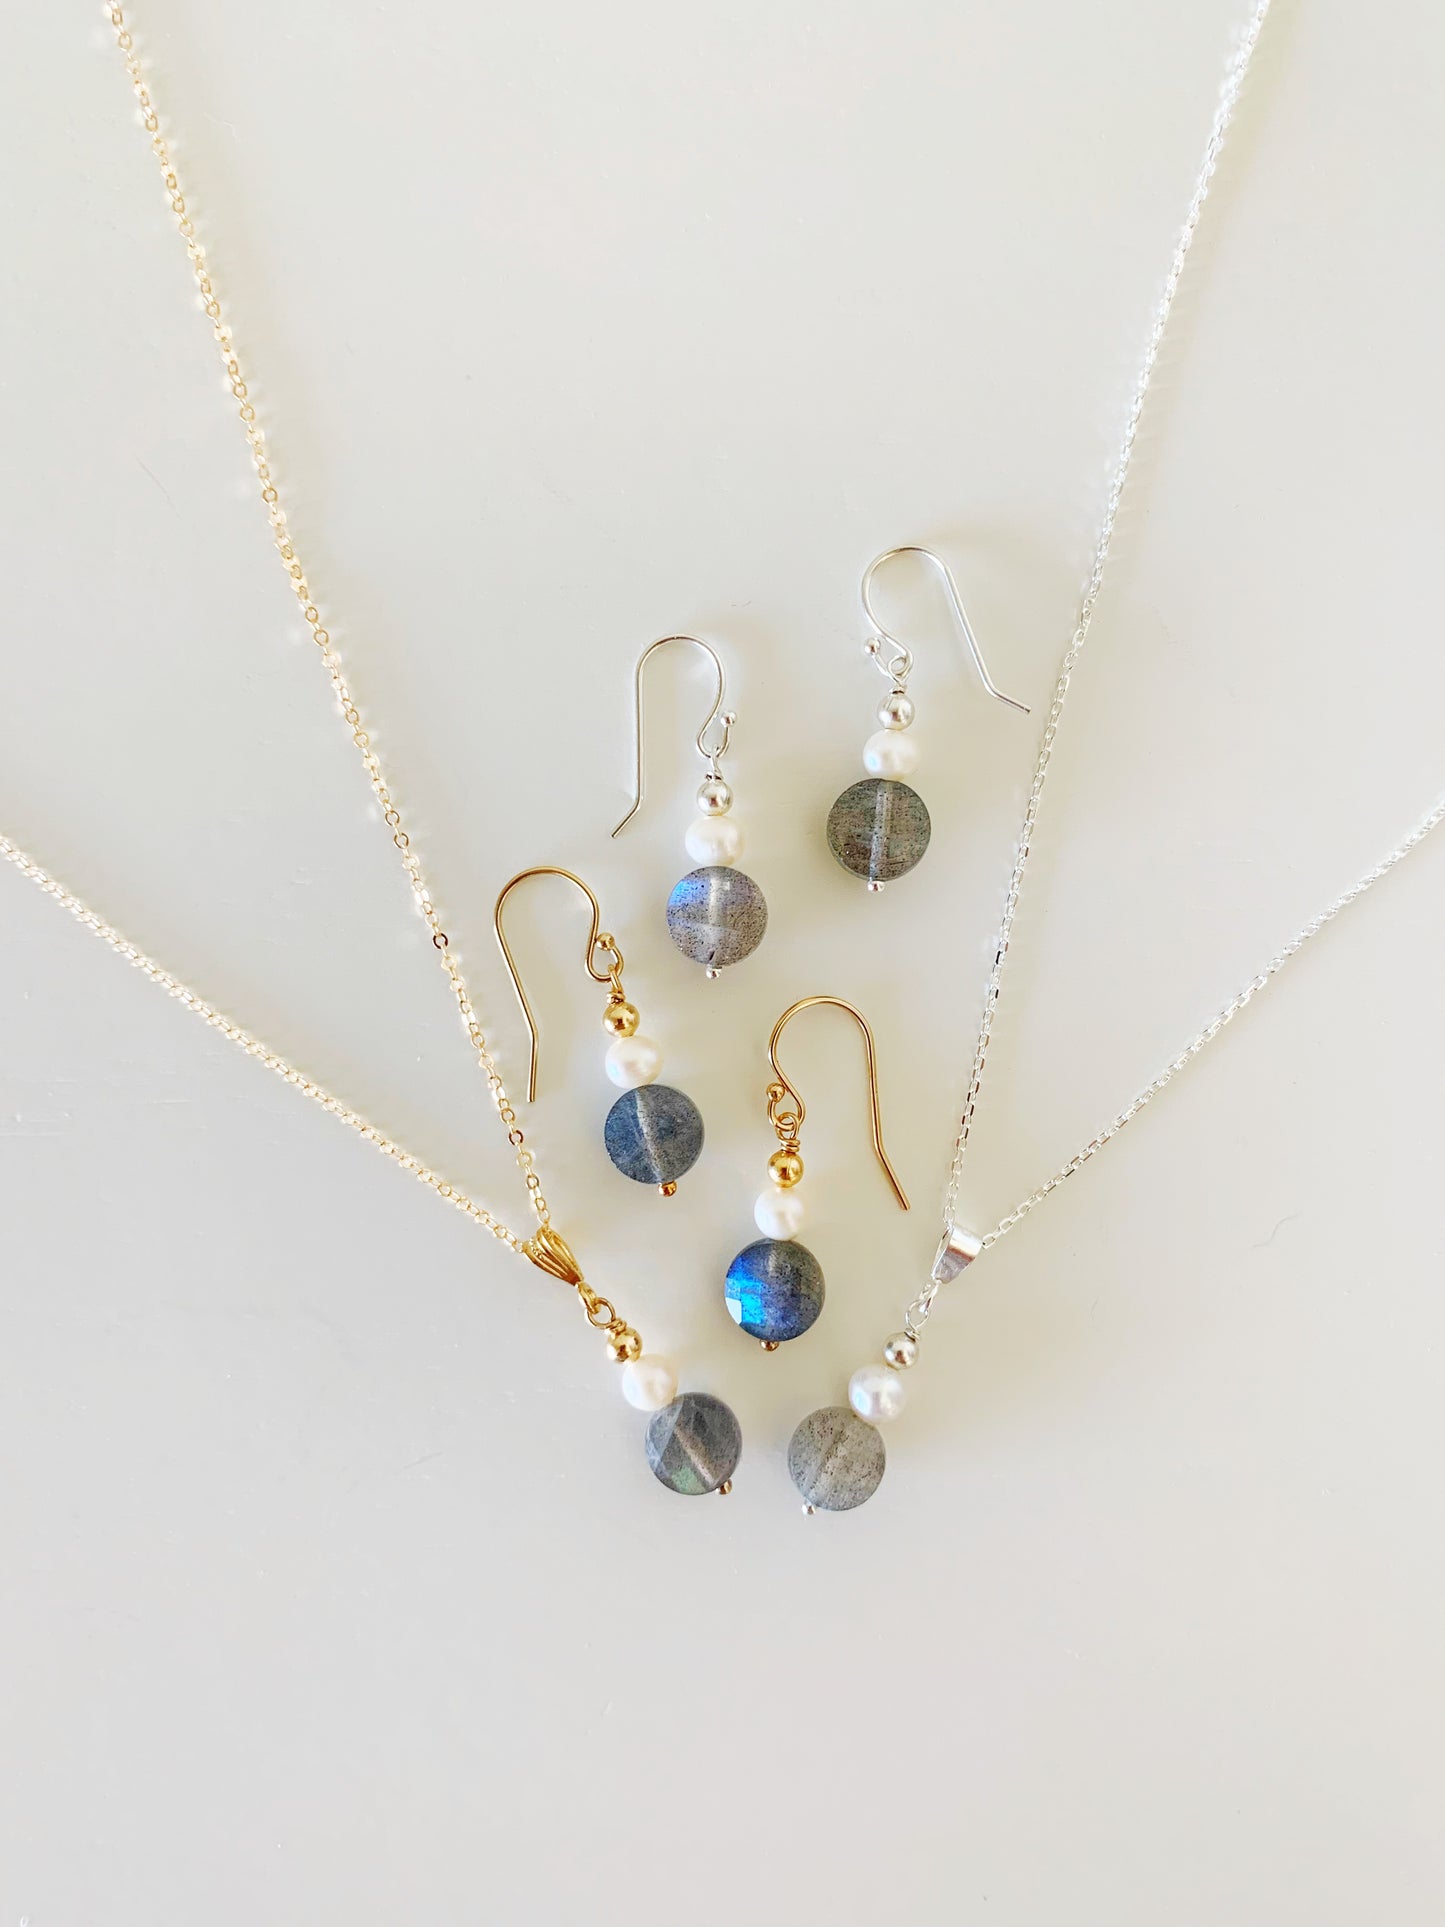 Arctic Necklace - Sterling silver, labradorite, freshwater pearl